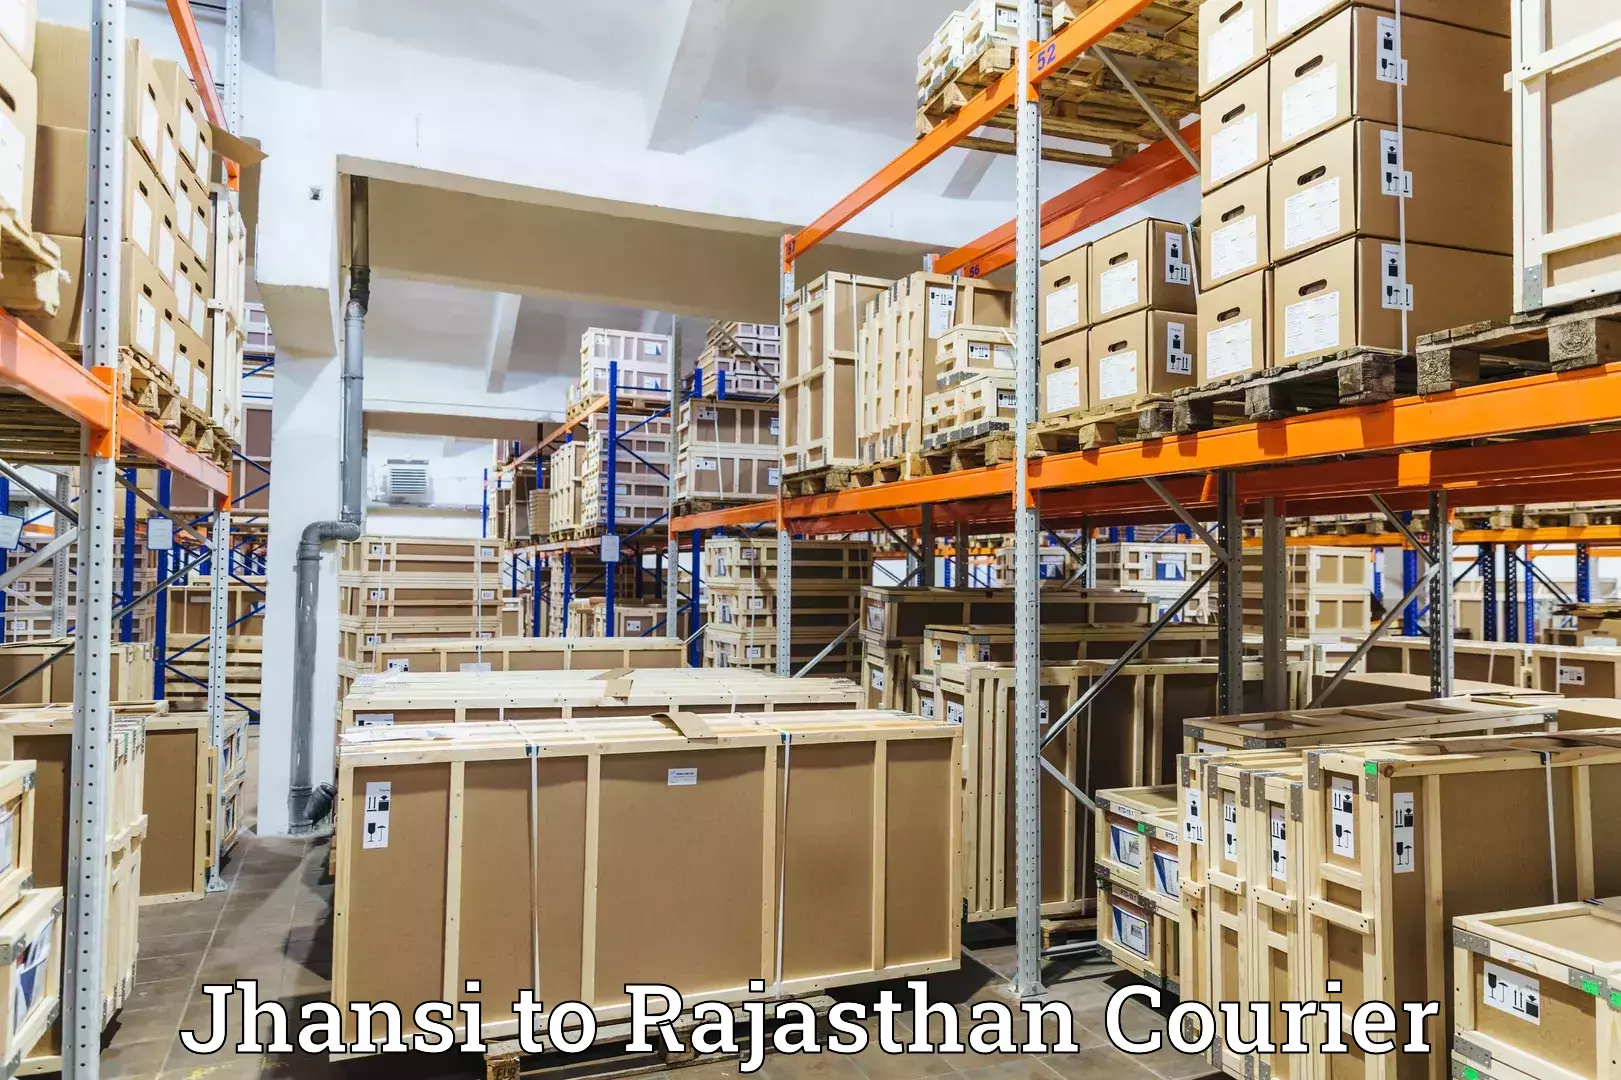 Efficient courier operations Jhansi to Jodhpur